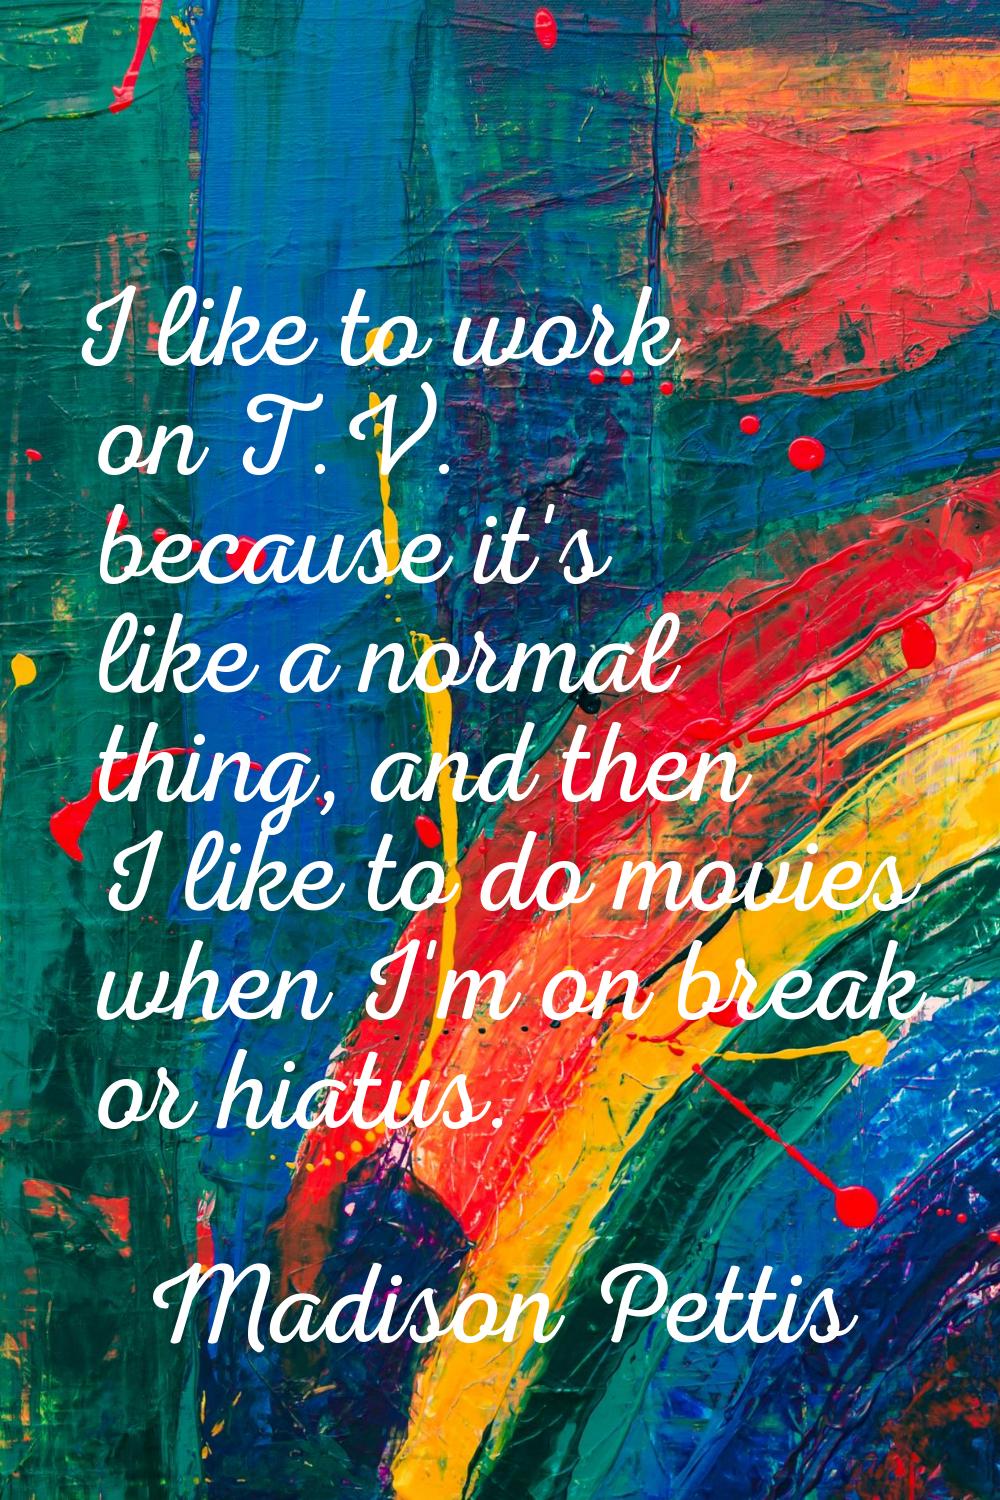 I like to work on T.V. because it's like a normal thing, and then I like to do movies when I'm on b